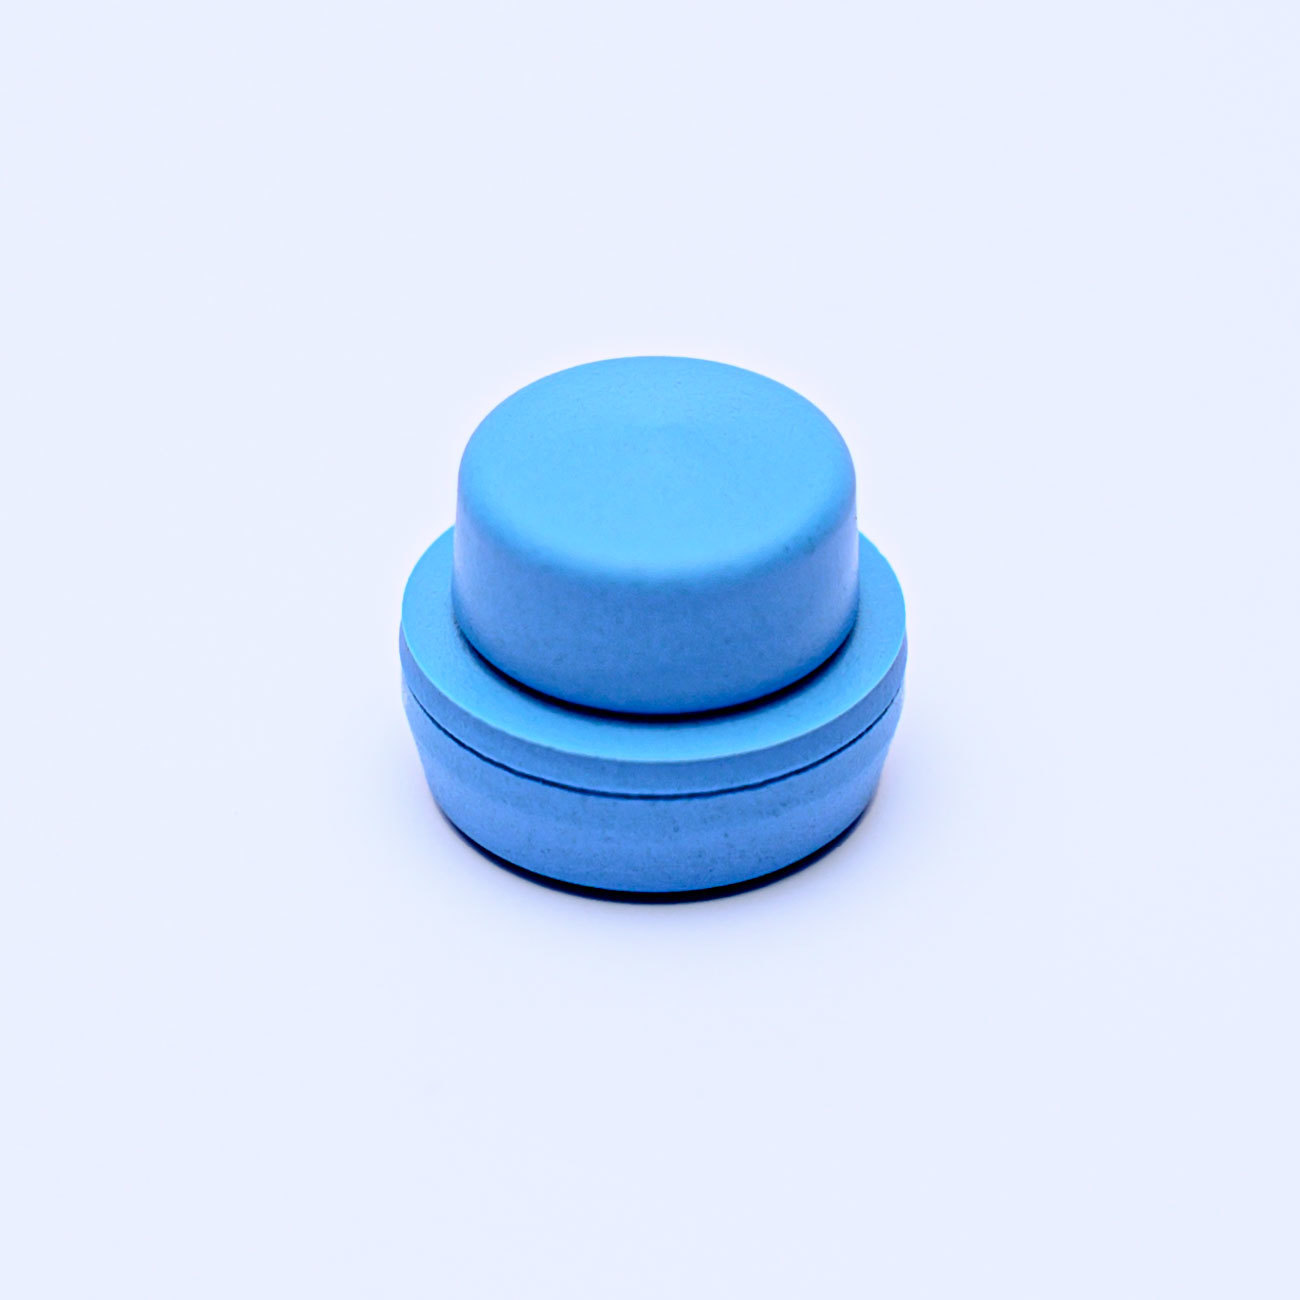 Halogenated butyl rubber stoppers for single-use venous blood sampler